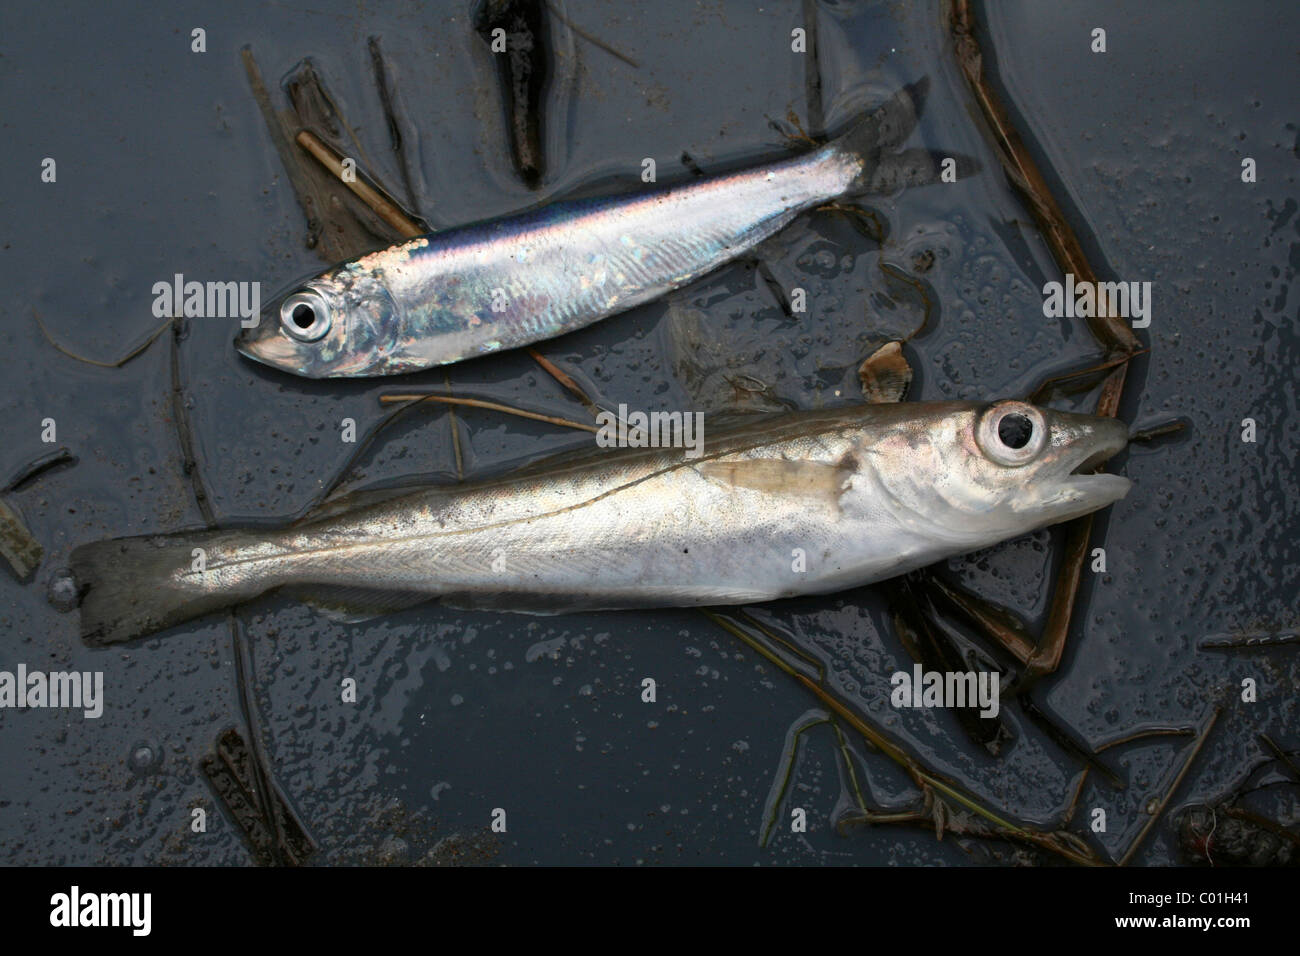 Two Small Fish, Sprat Sprattus sprattus On Top, Caught During a Beamtrawling In The River Mersey, Liverpool, UK Stock Photo